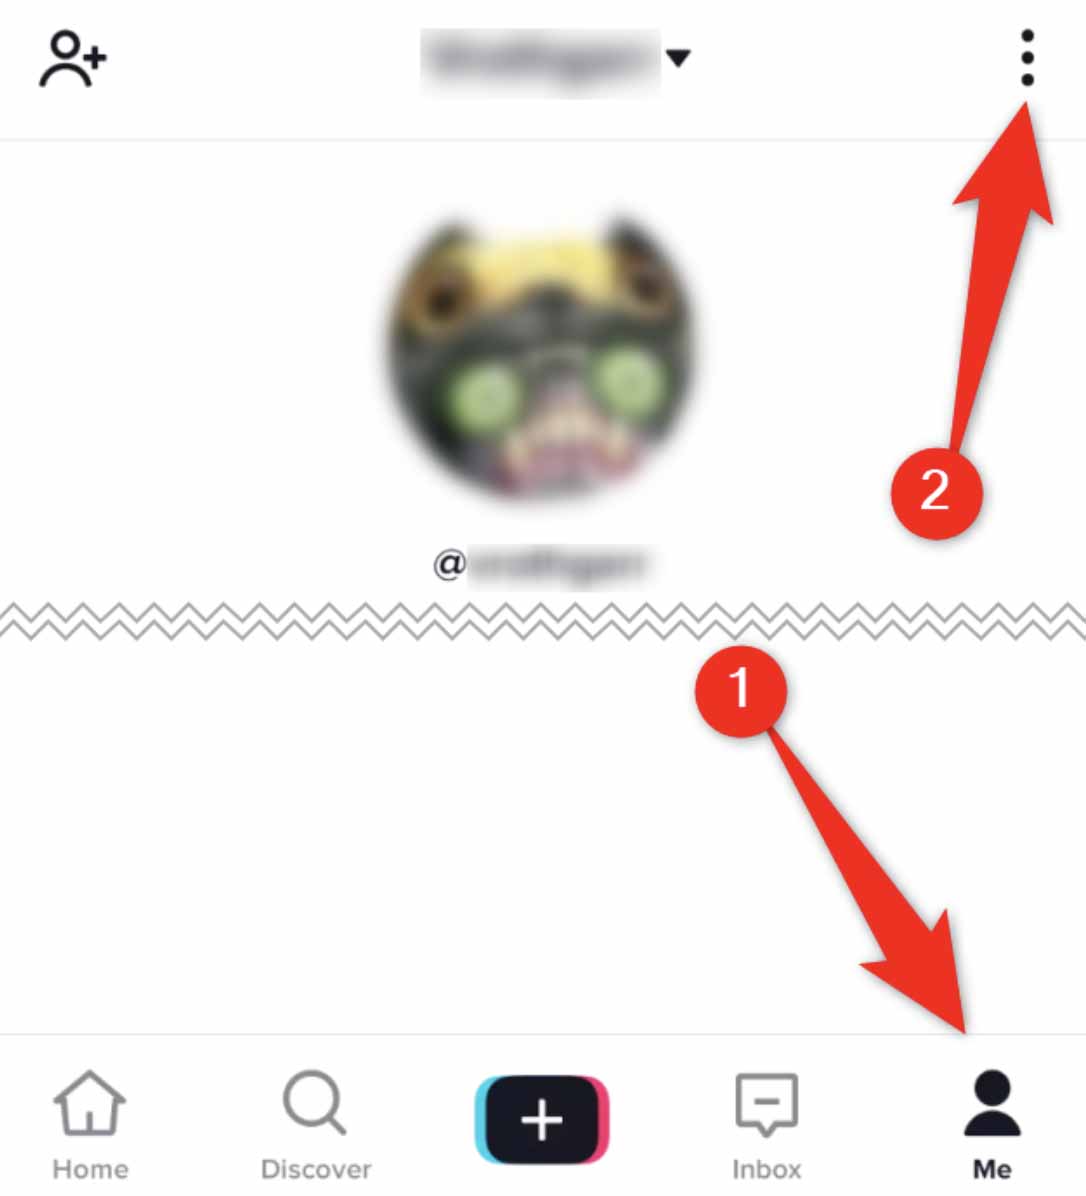 How to view connected devices in TikTok